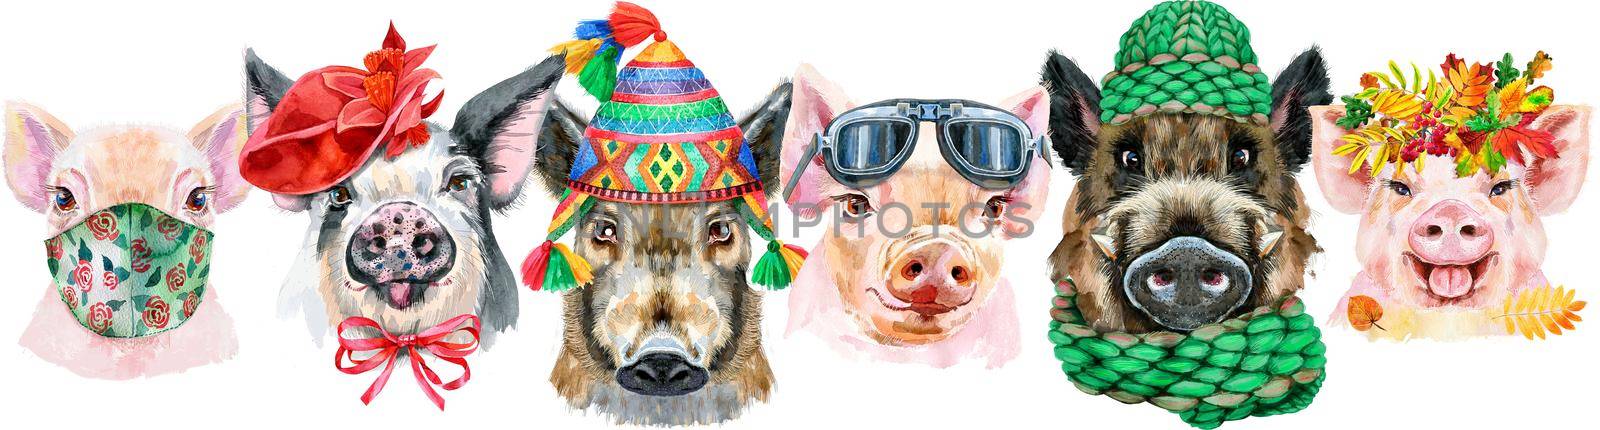 Cute border from watercolor portraits of pigs. Watercolor illustration of pigs in wreath of autumn leaves, biker glasses, red hat, chullo hat, knitted green hat and medical mask